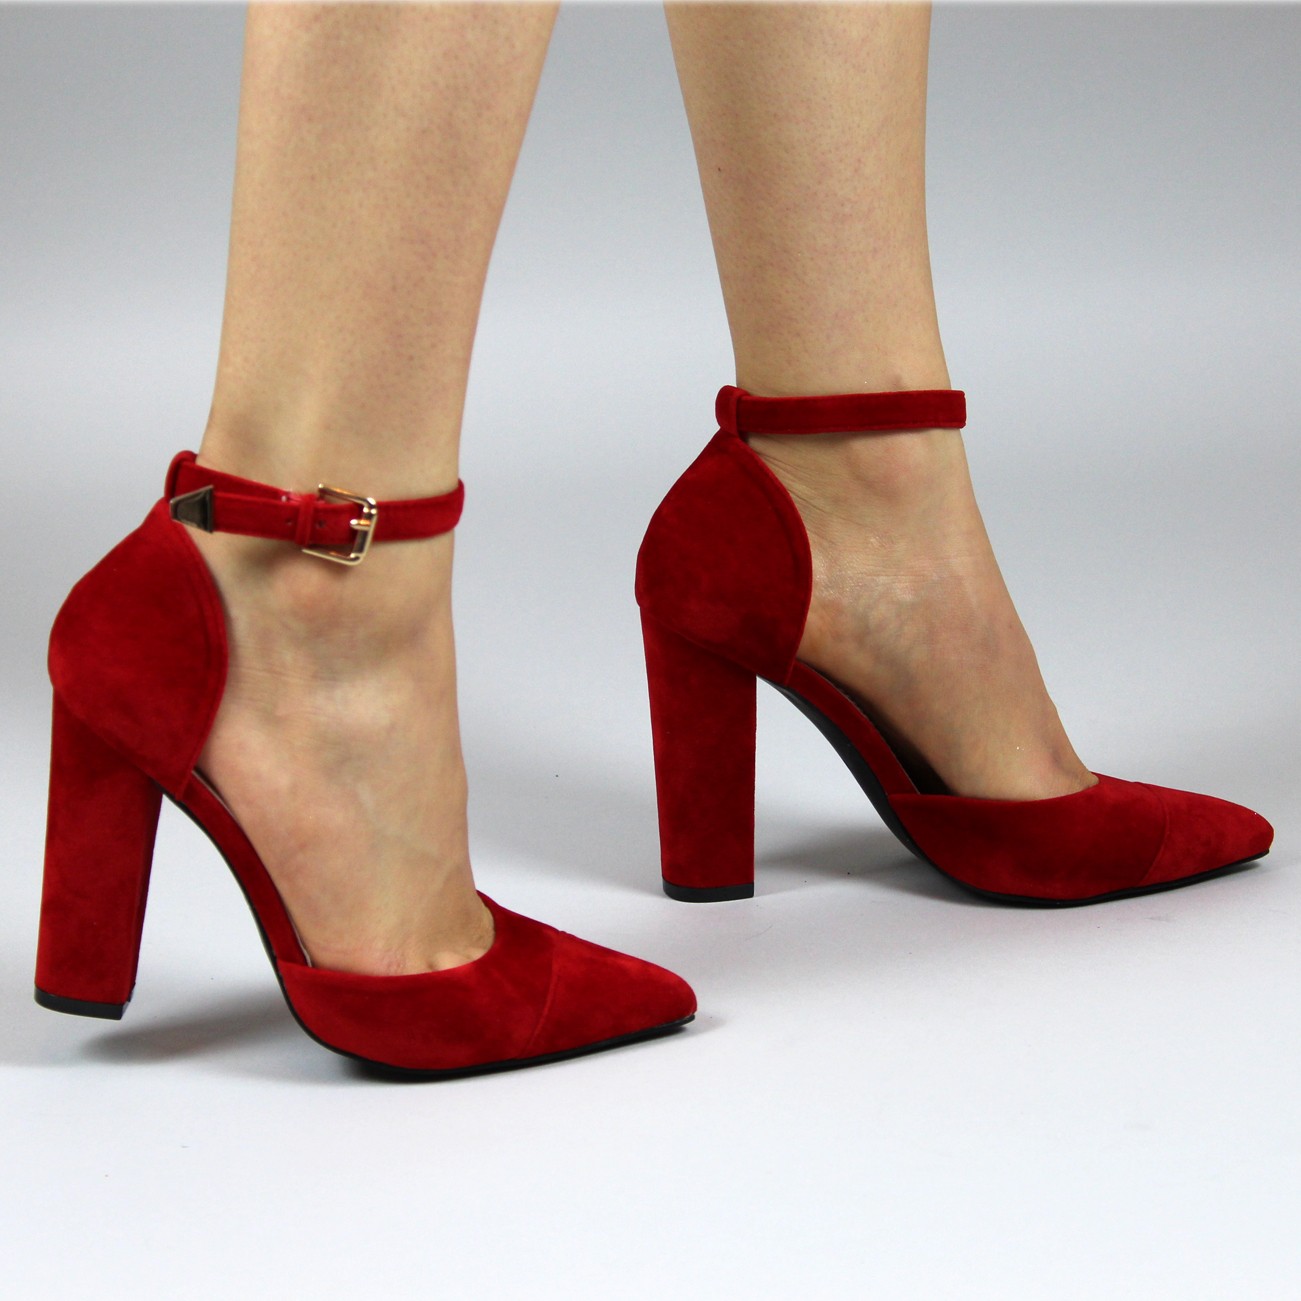 ankle strap shoes sofia red suede block heel ankle strap pointed court shoes SOYEFNQ